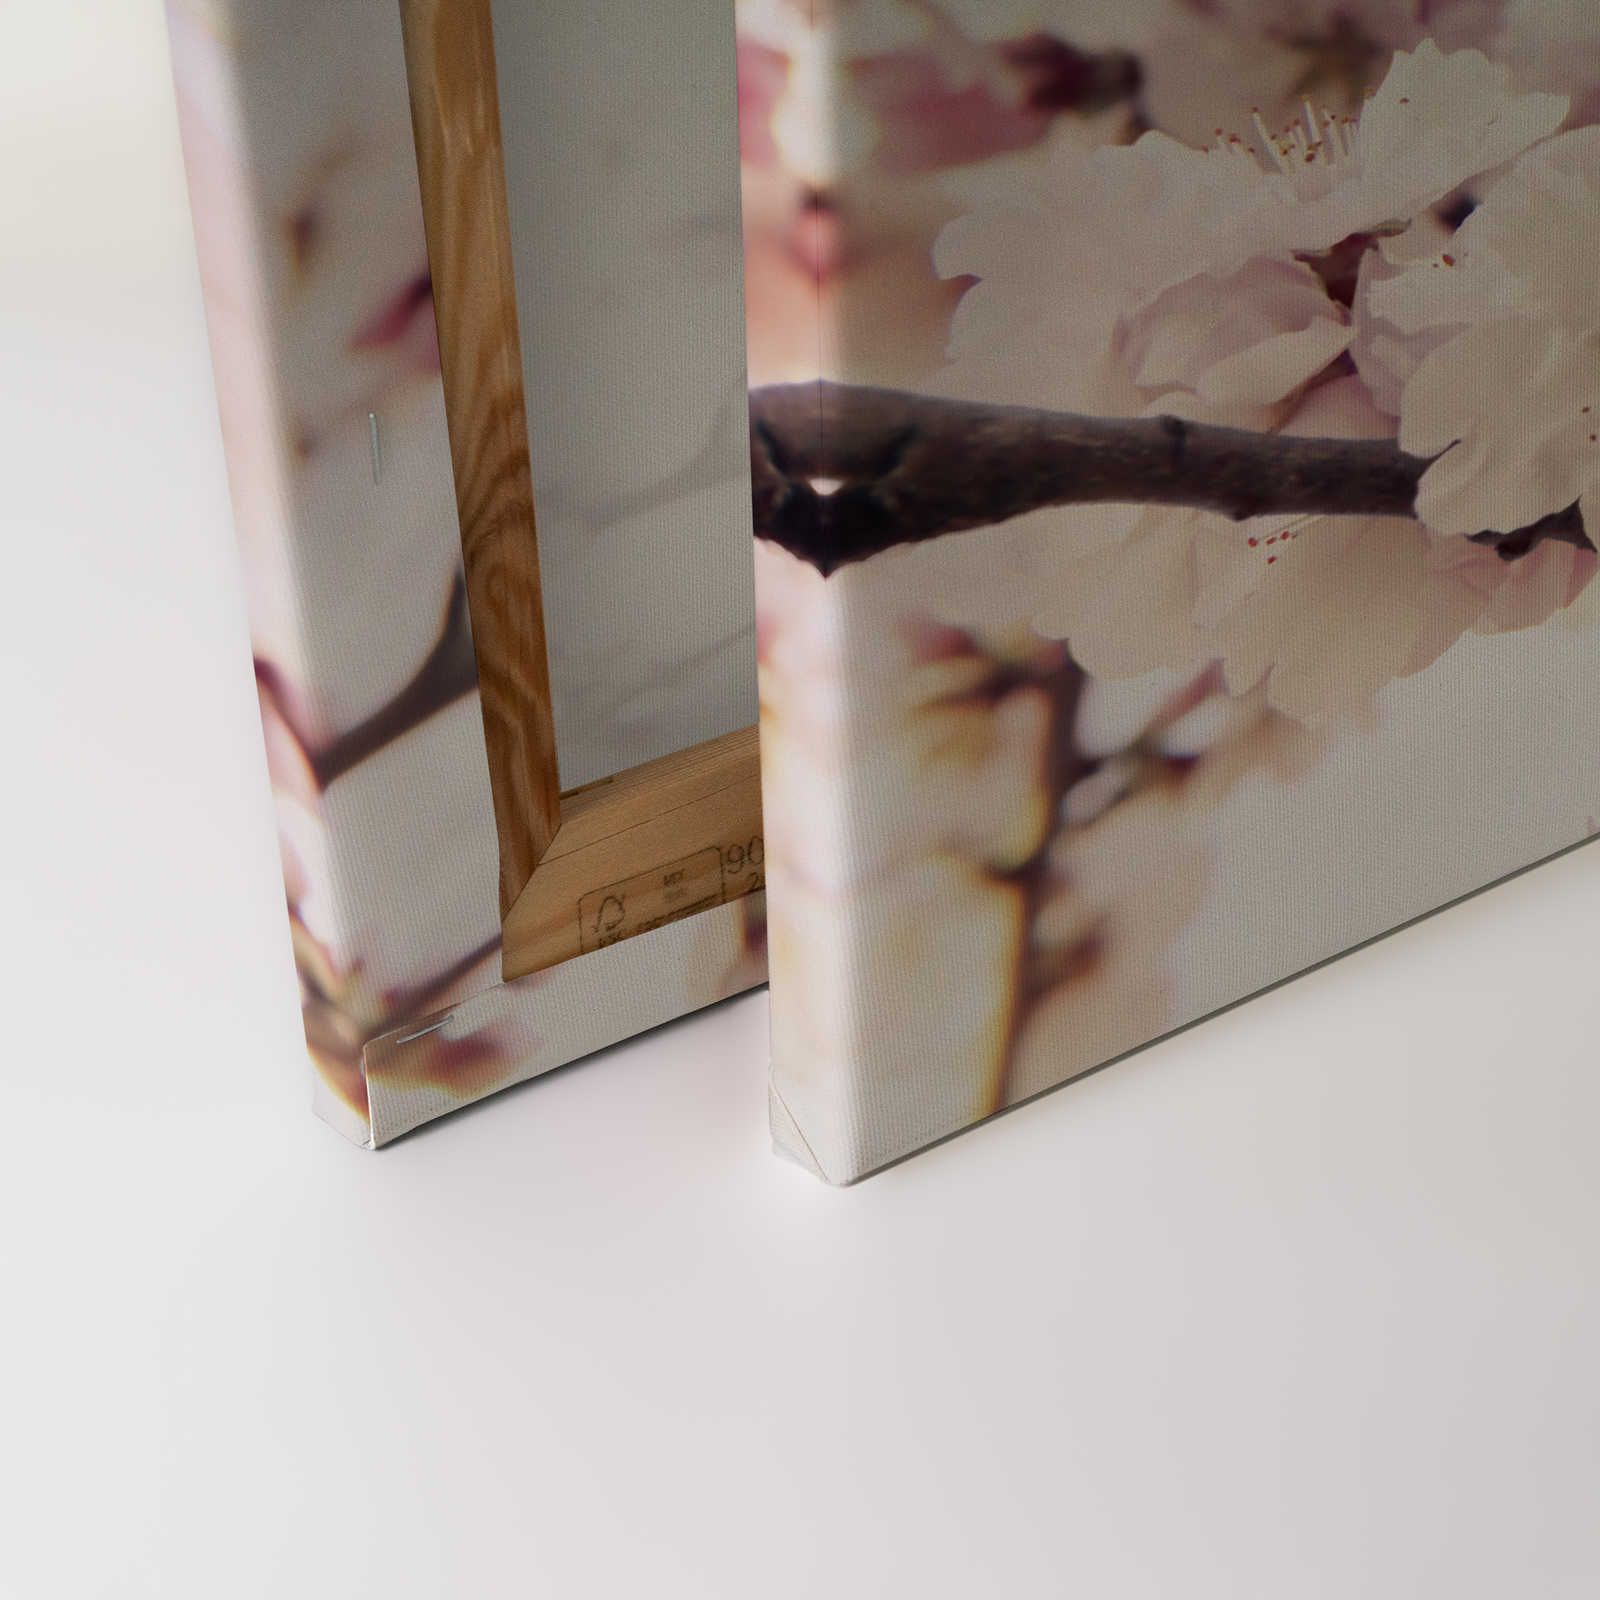             Nature Canvas Painting with Cherry Blossoms - 0.90 m x 0.60 m
        